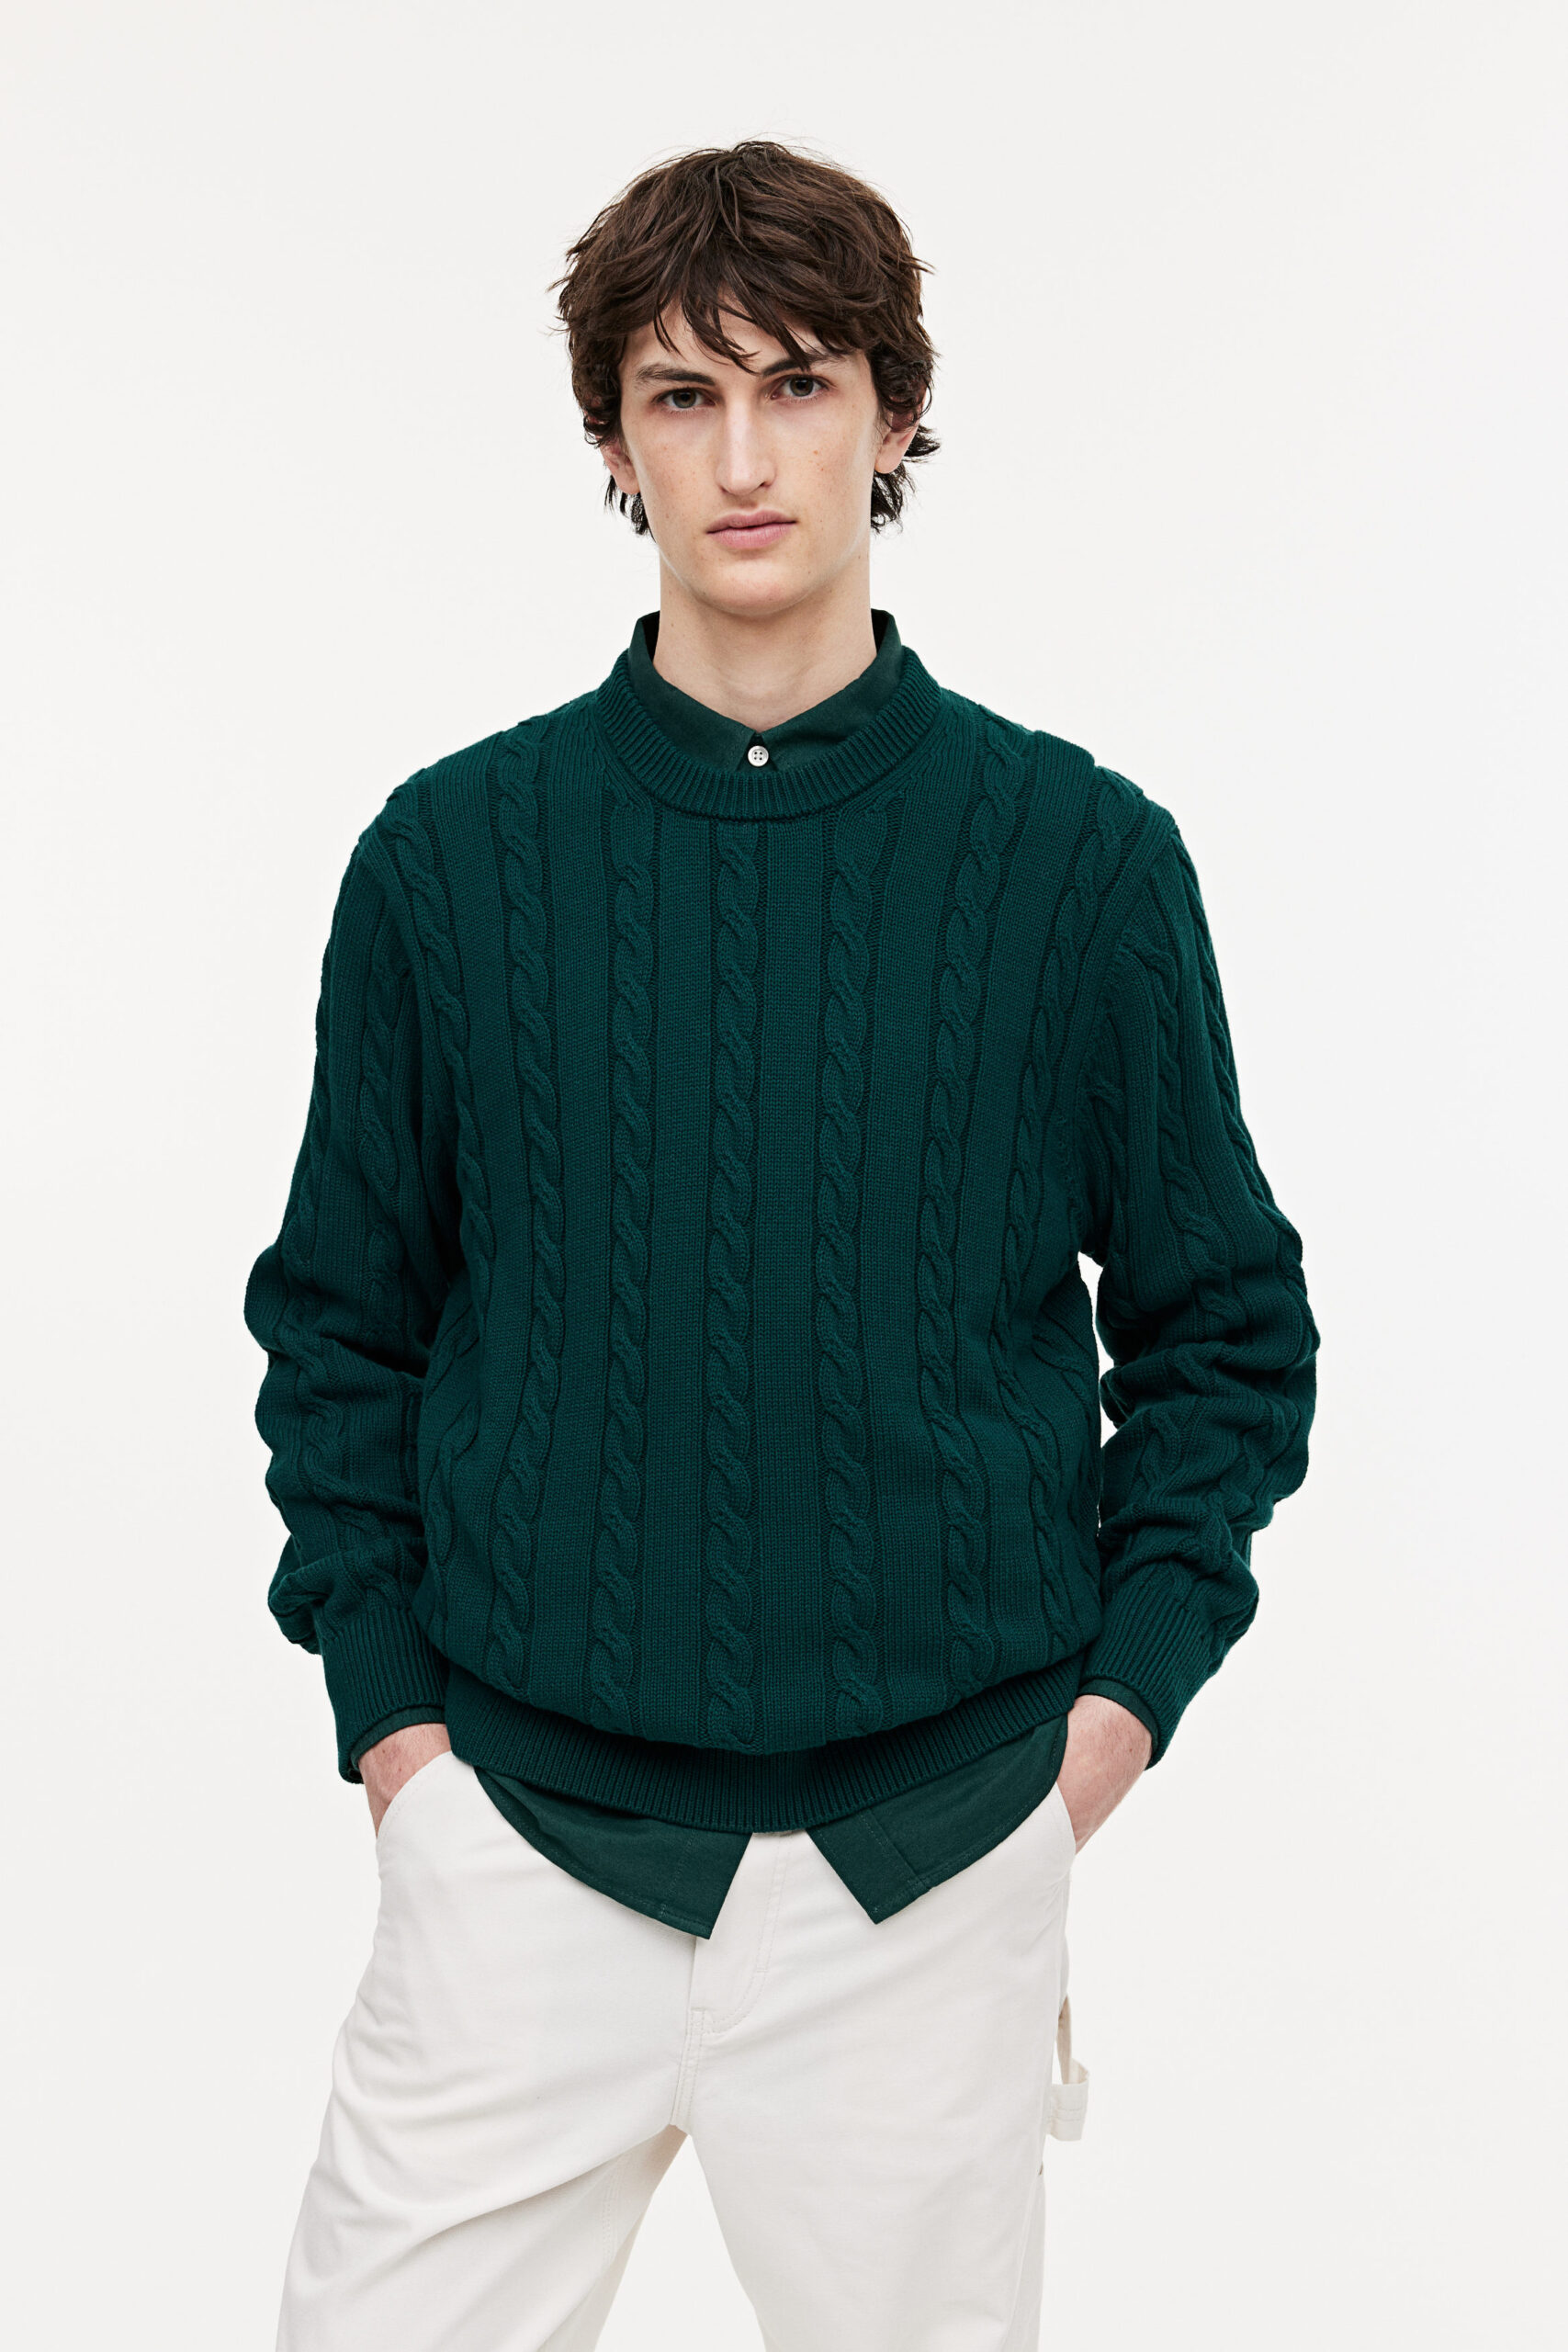 man in a green cable knit sweater